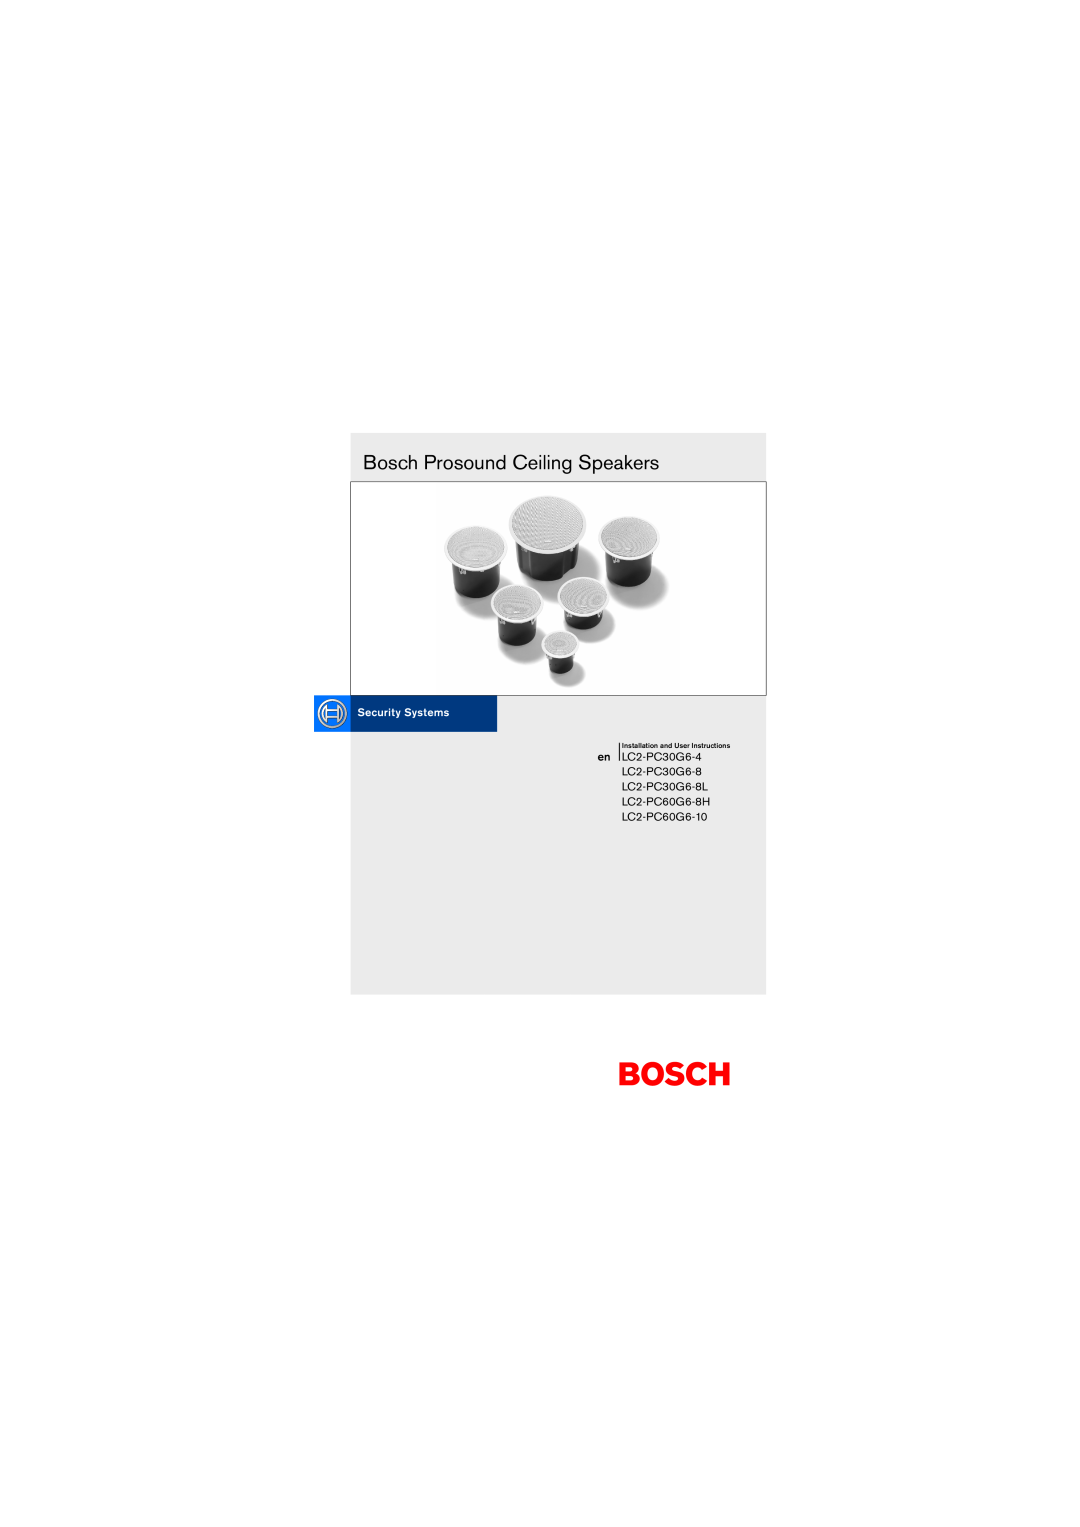 Bosch Appliances LC2-PC30G6-8L, LC2-PC60G6-8H manual Bosch Prosound Ceiling Speakers, Installation and User Instructions 